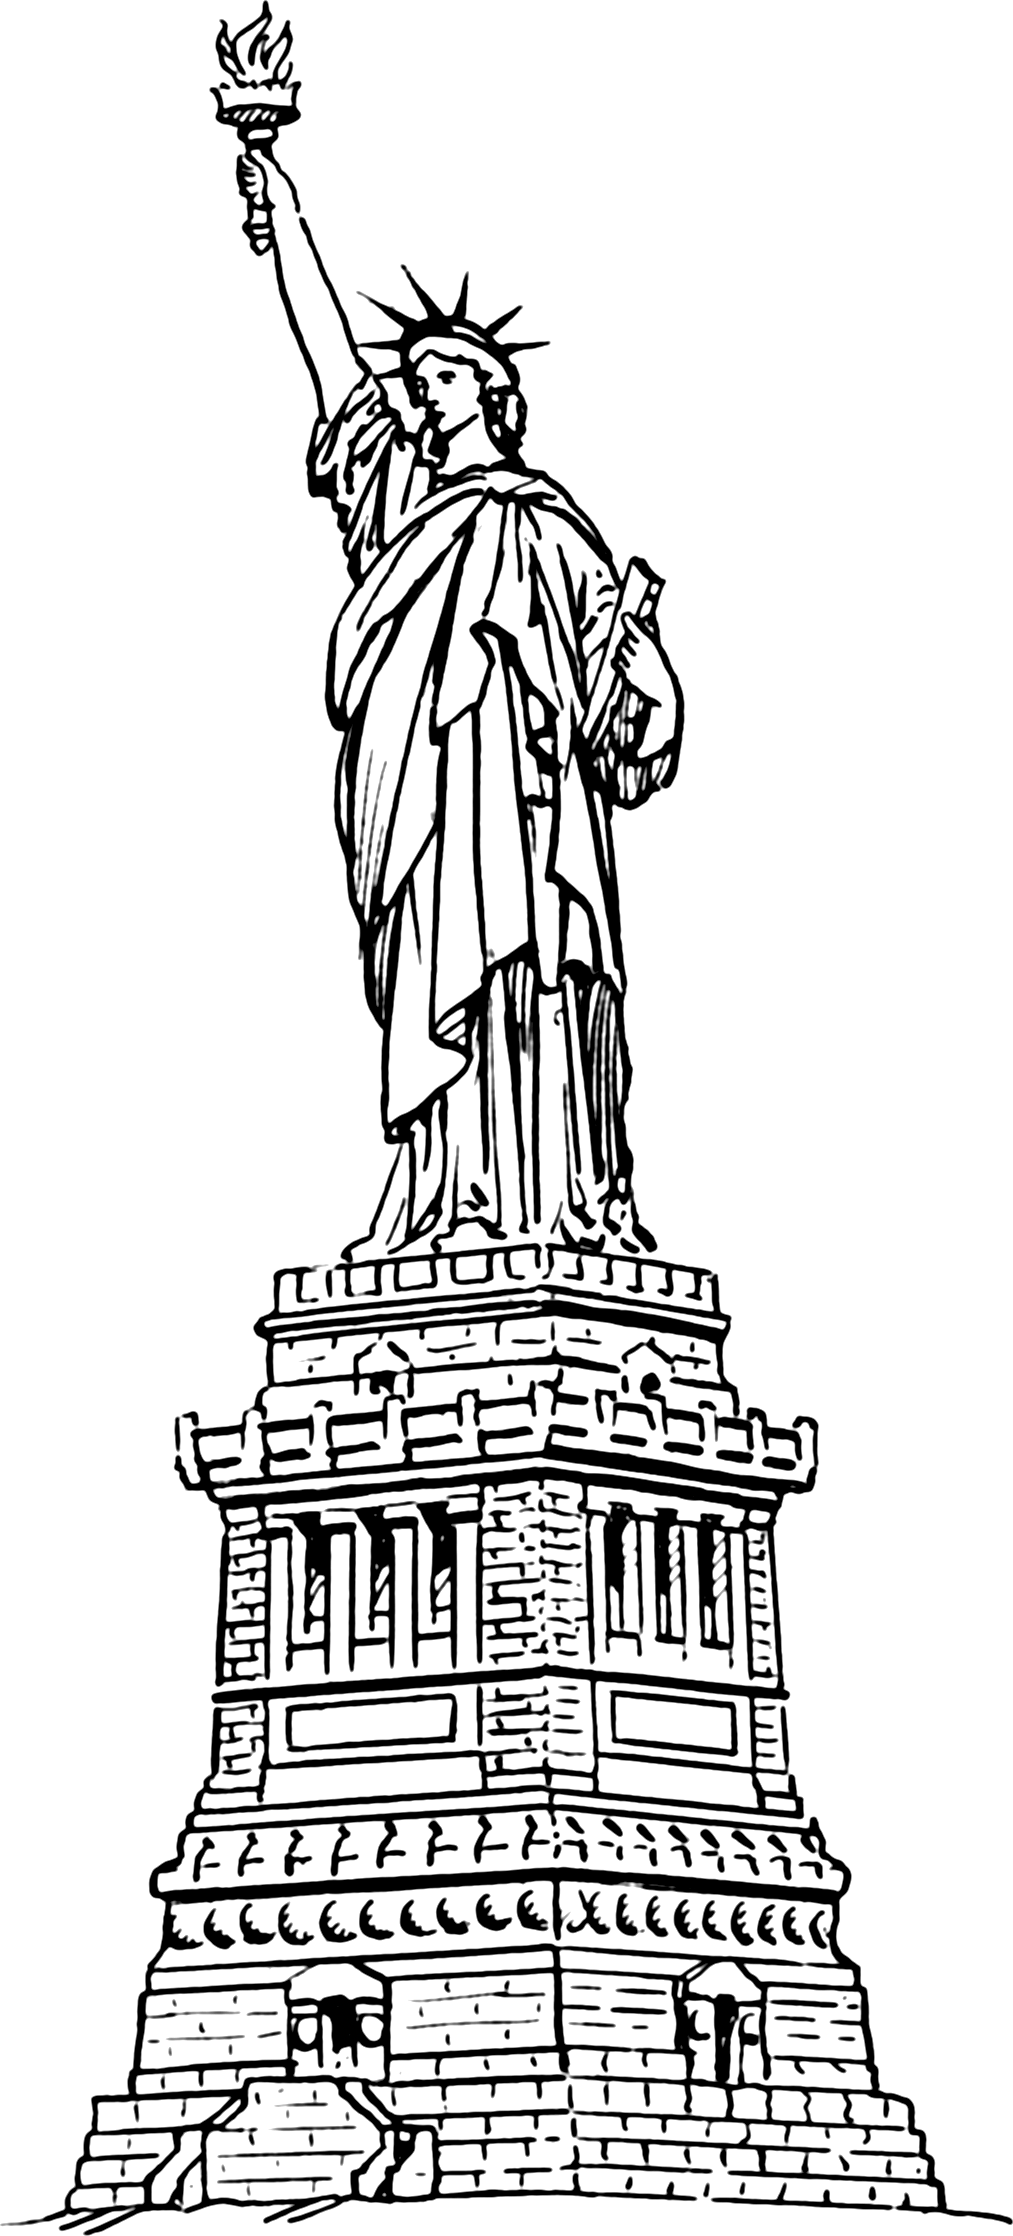 File:Statue of Liberty (PSF).png - Wikimedia Commons